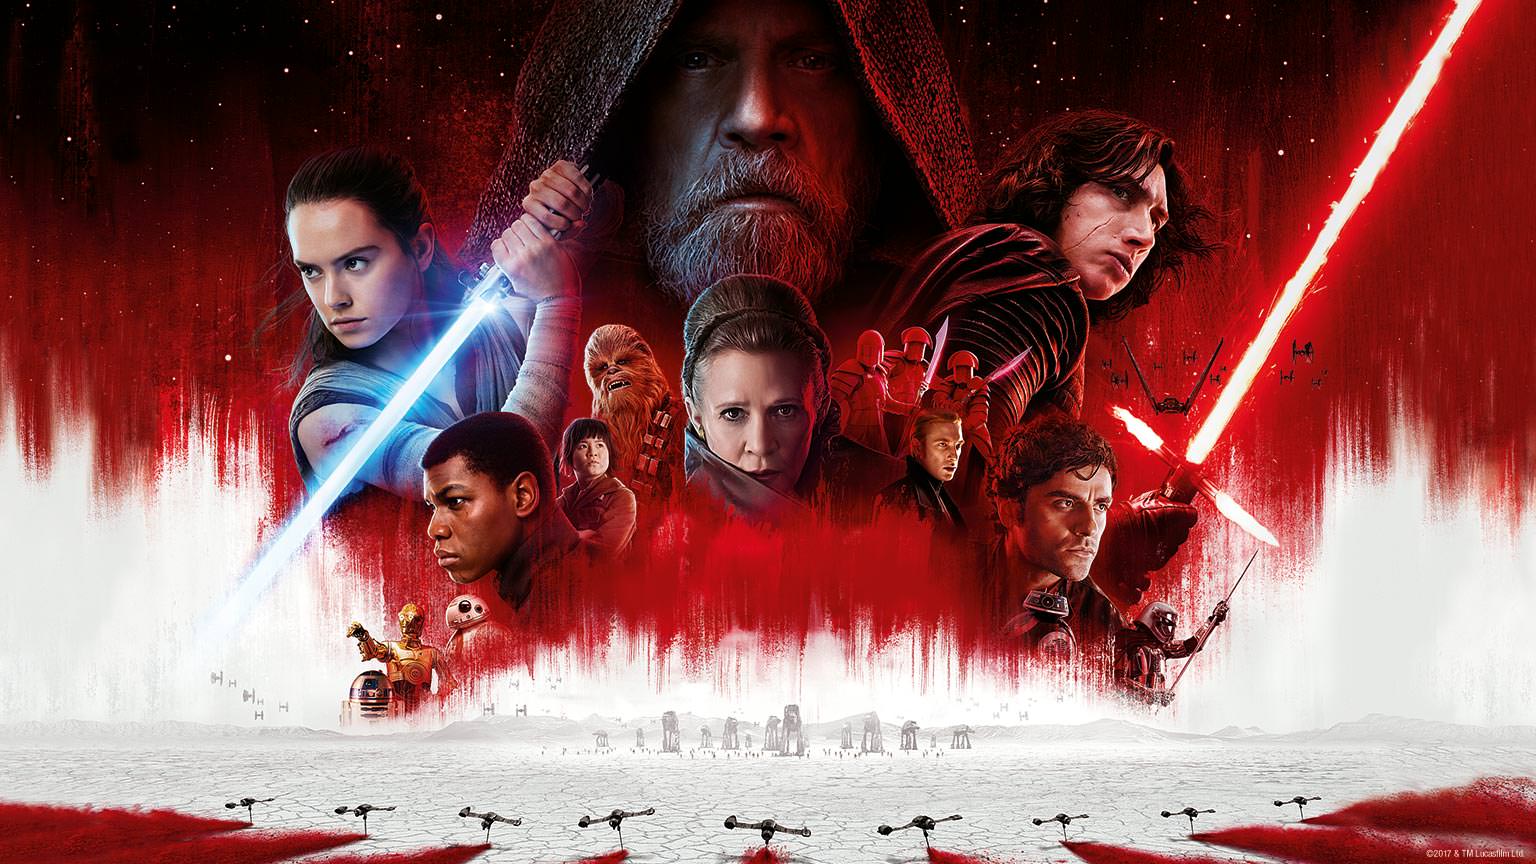 Rian Johnson defends 'hated' Star Wars: The Last Jedi scene from